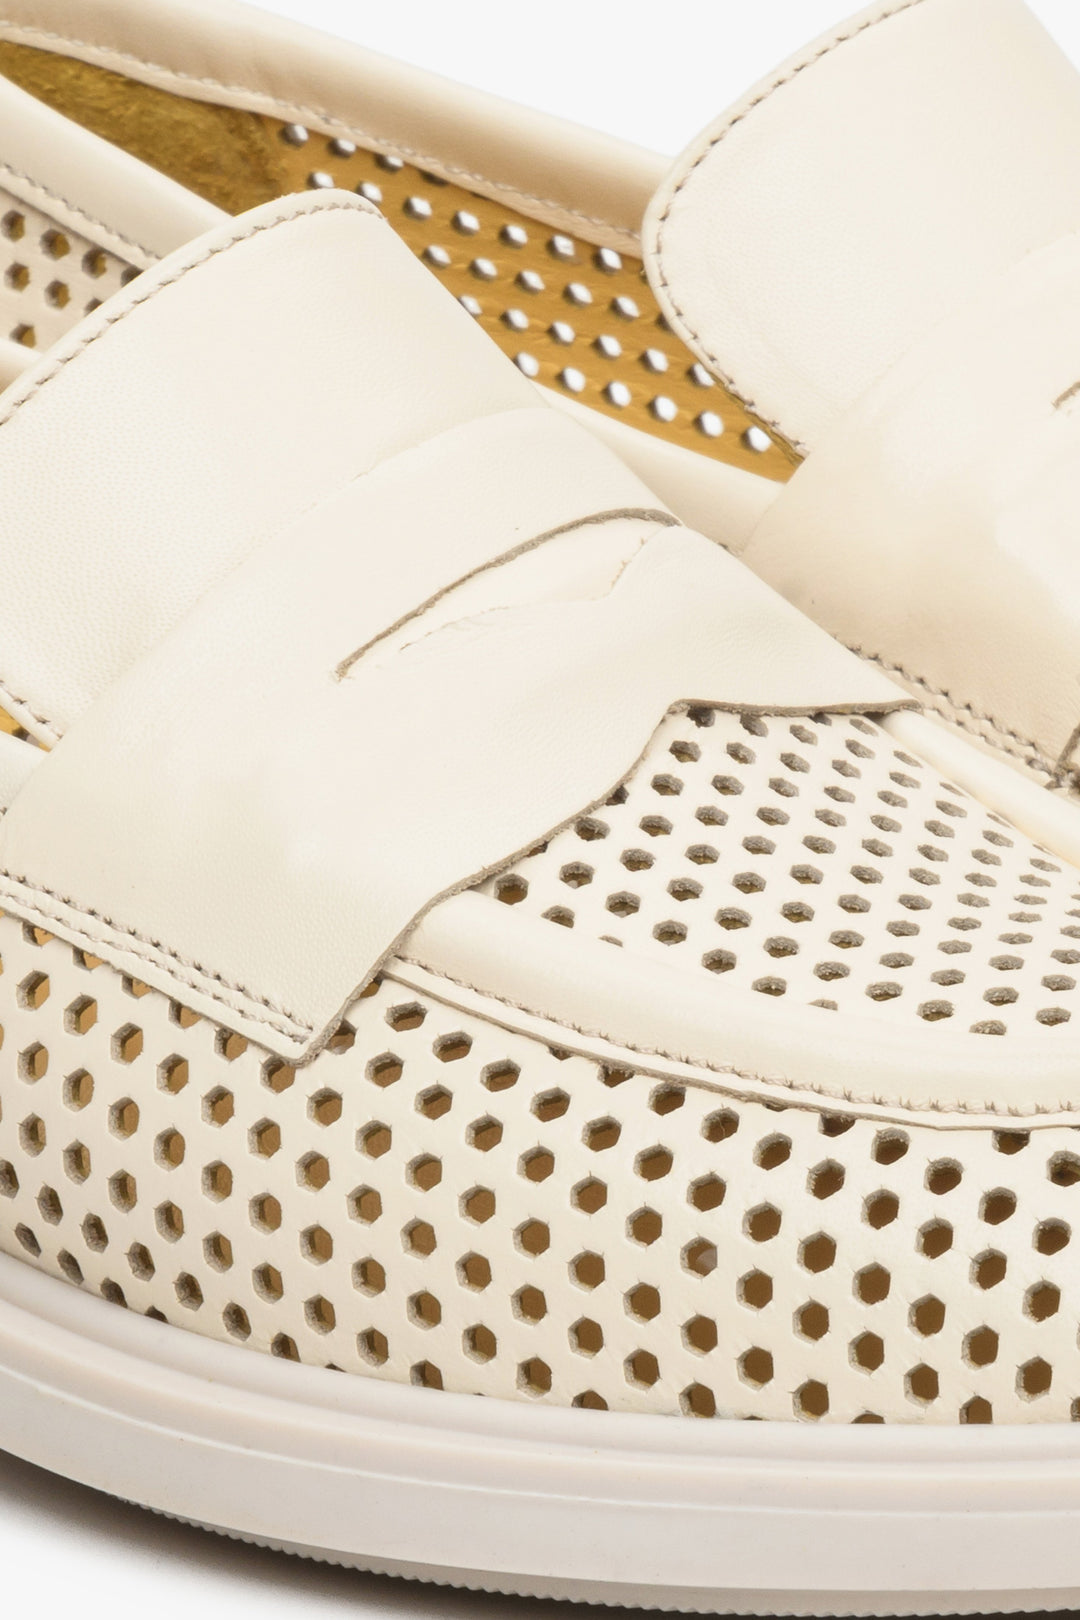 Women's light beige natural leather loafers by Estro - close-up on the stitching and perforation pattern.